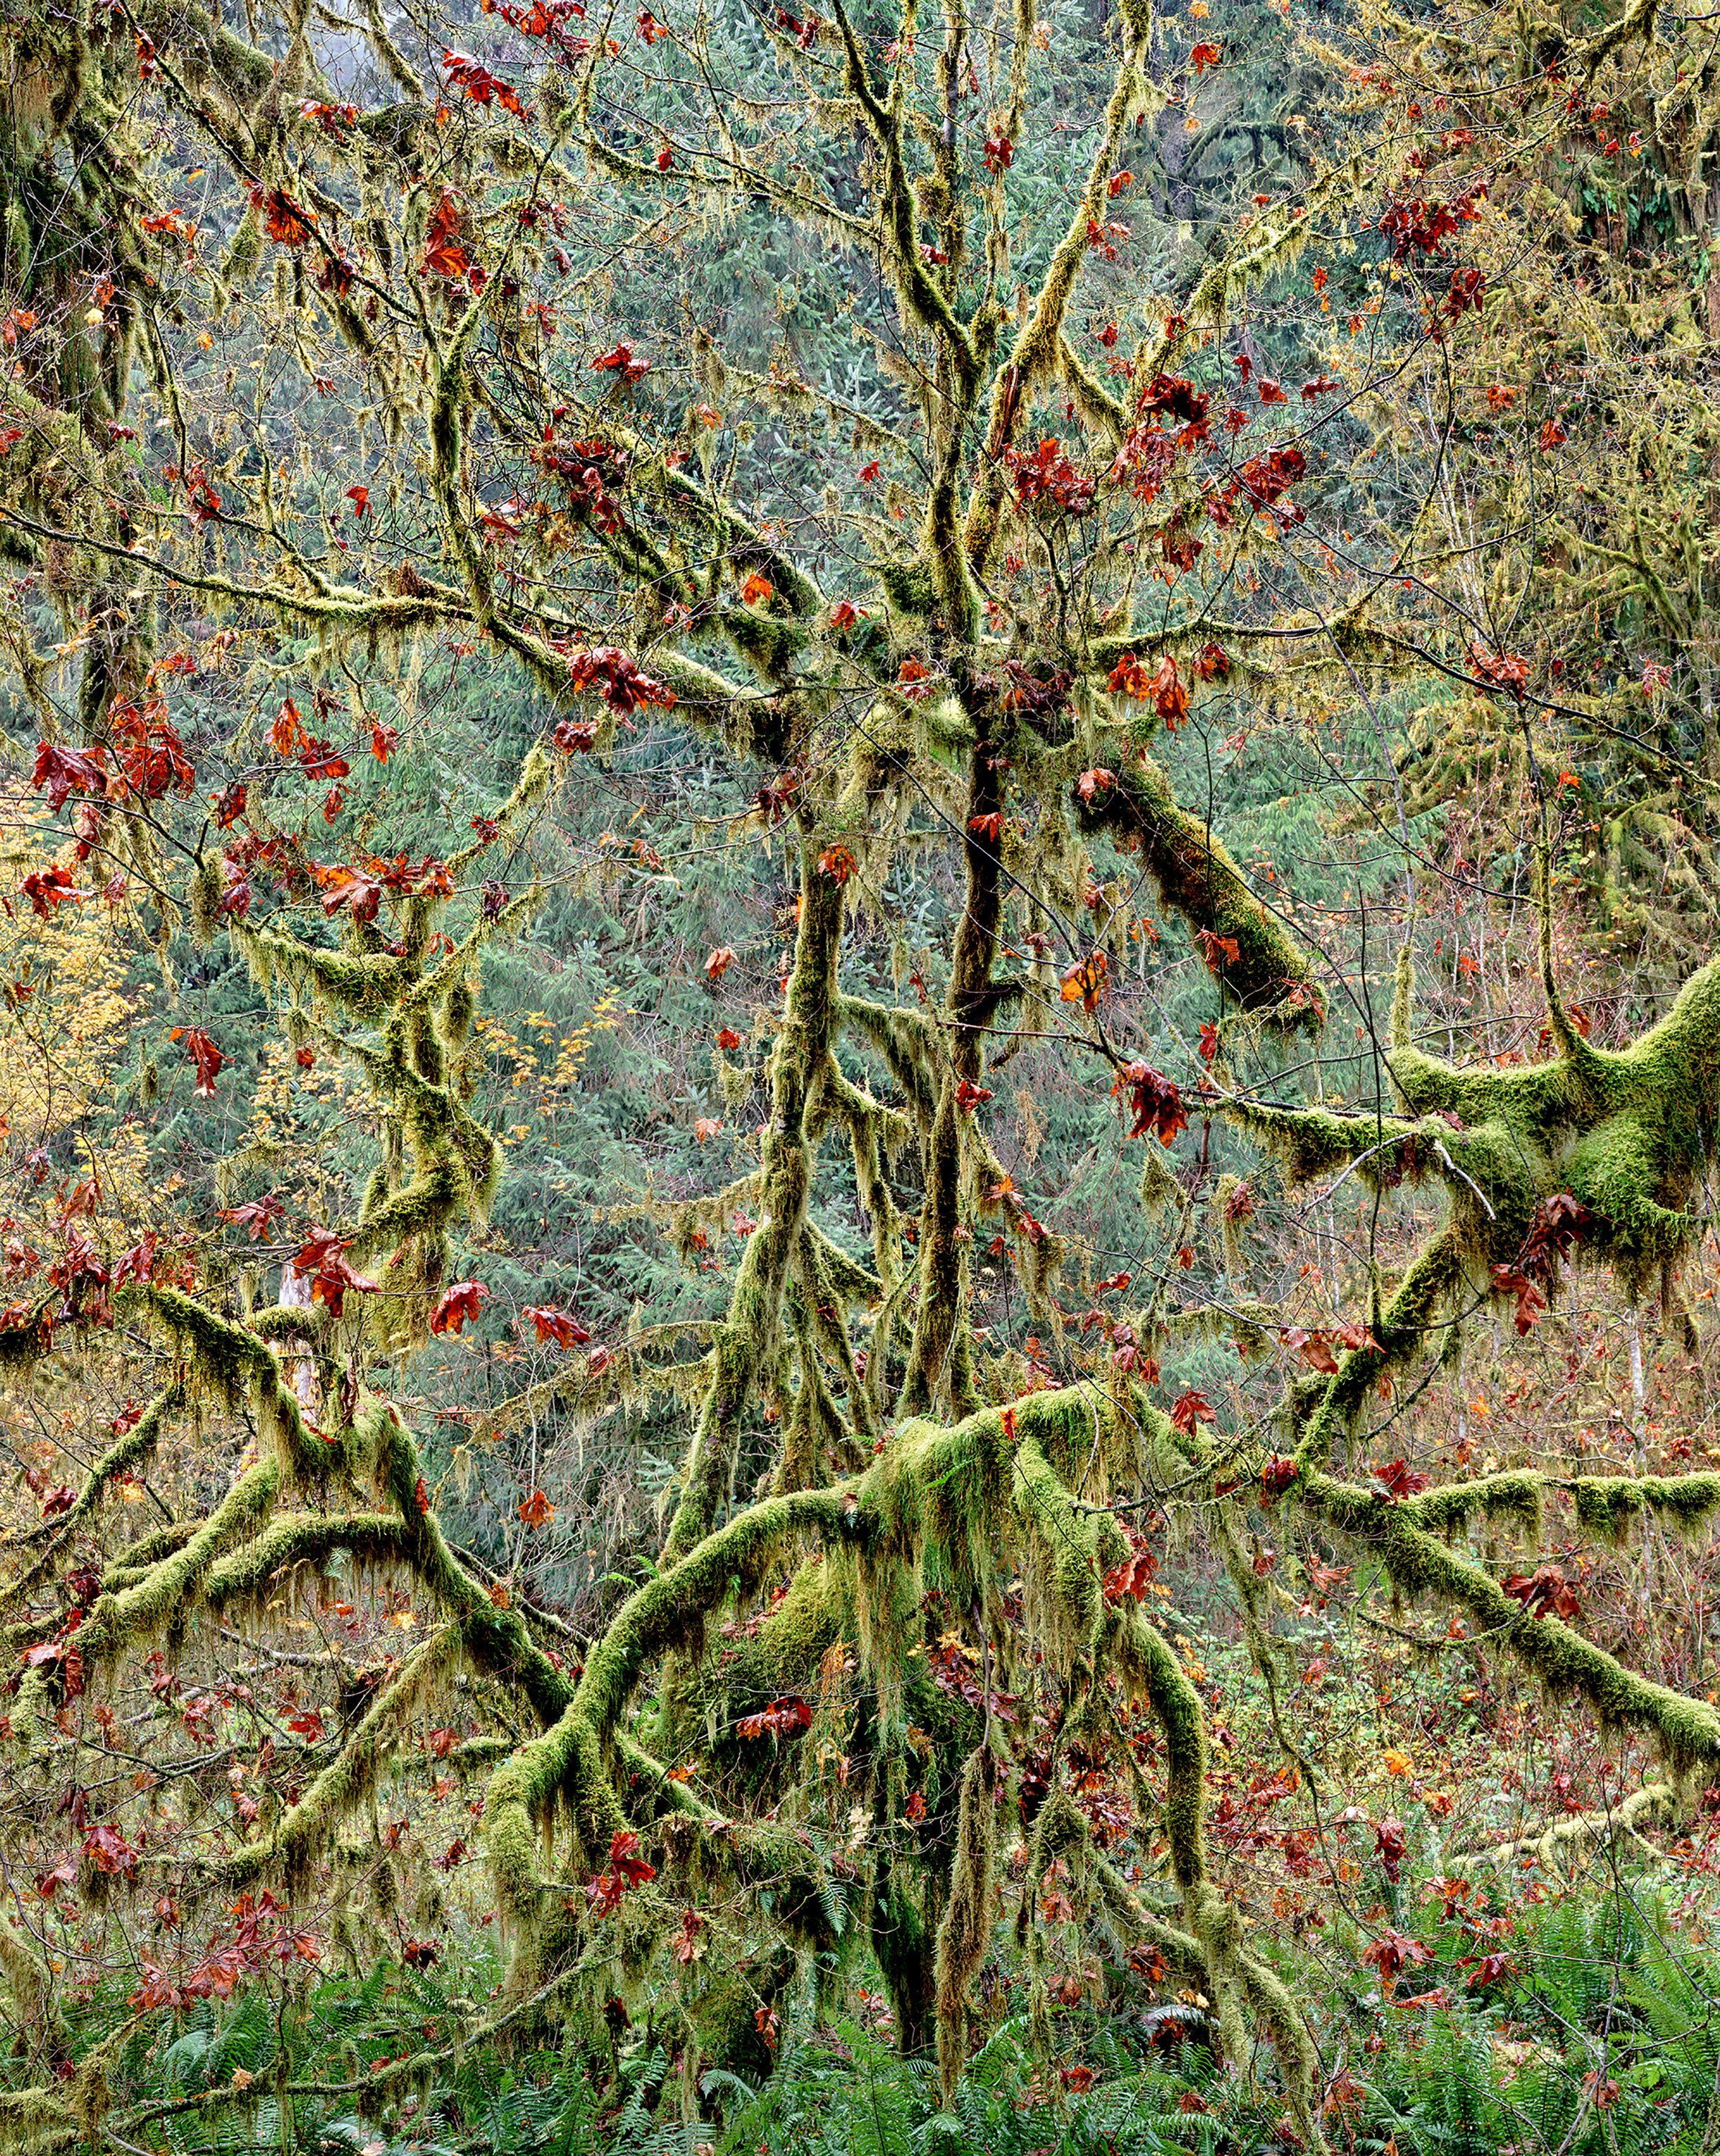 Dying Vine Maple with Hanging Moss, Hoh Rainforest, Washington